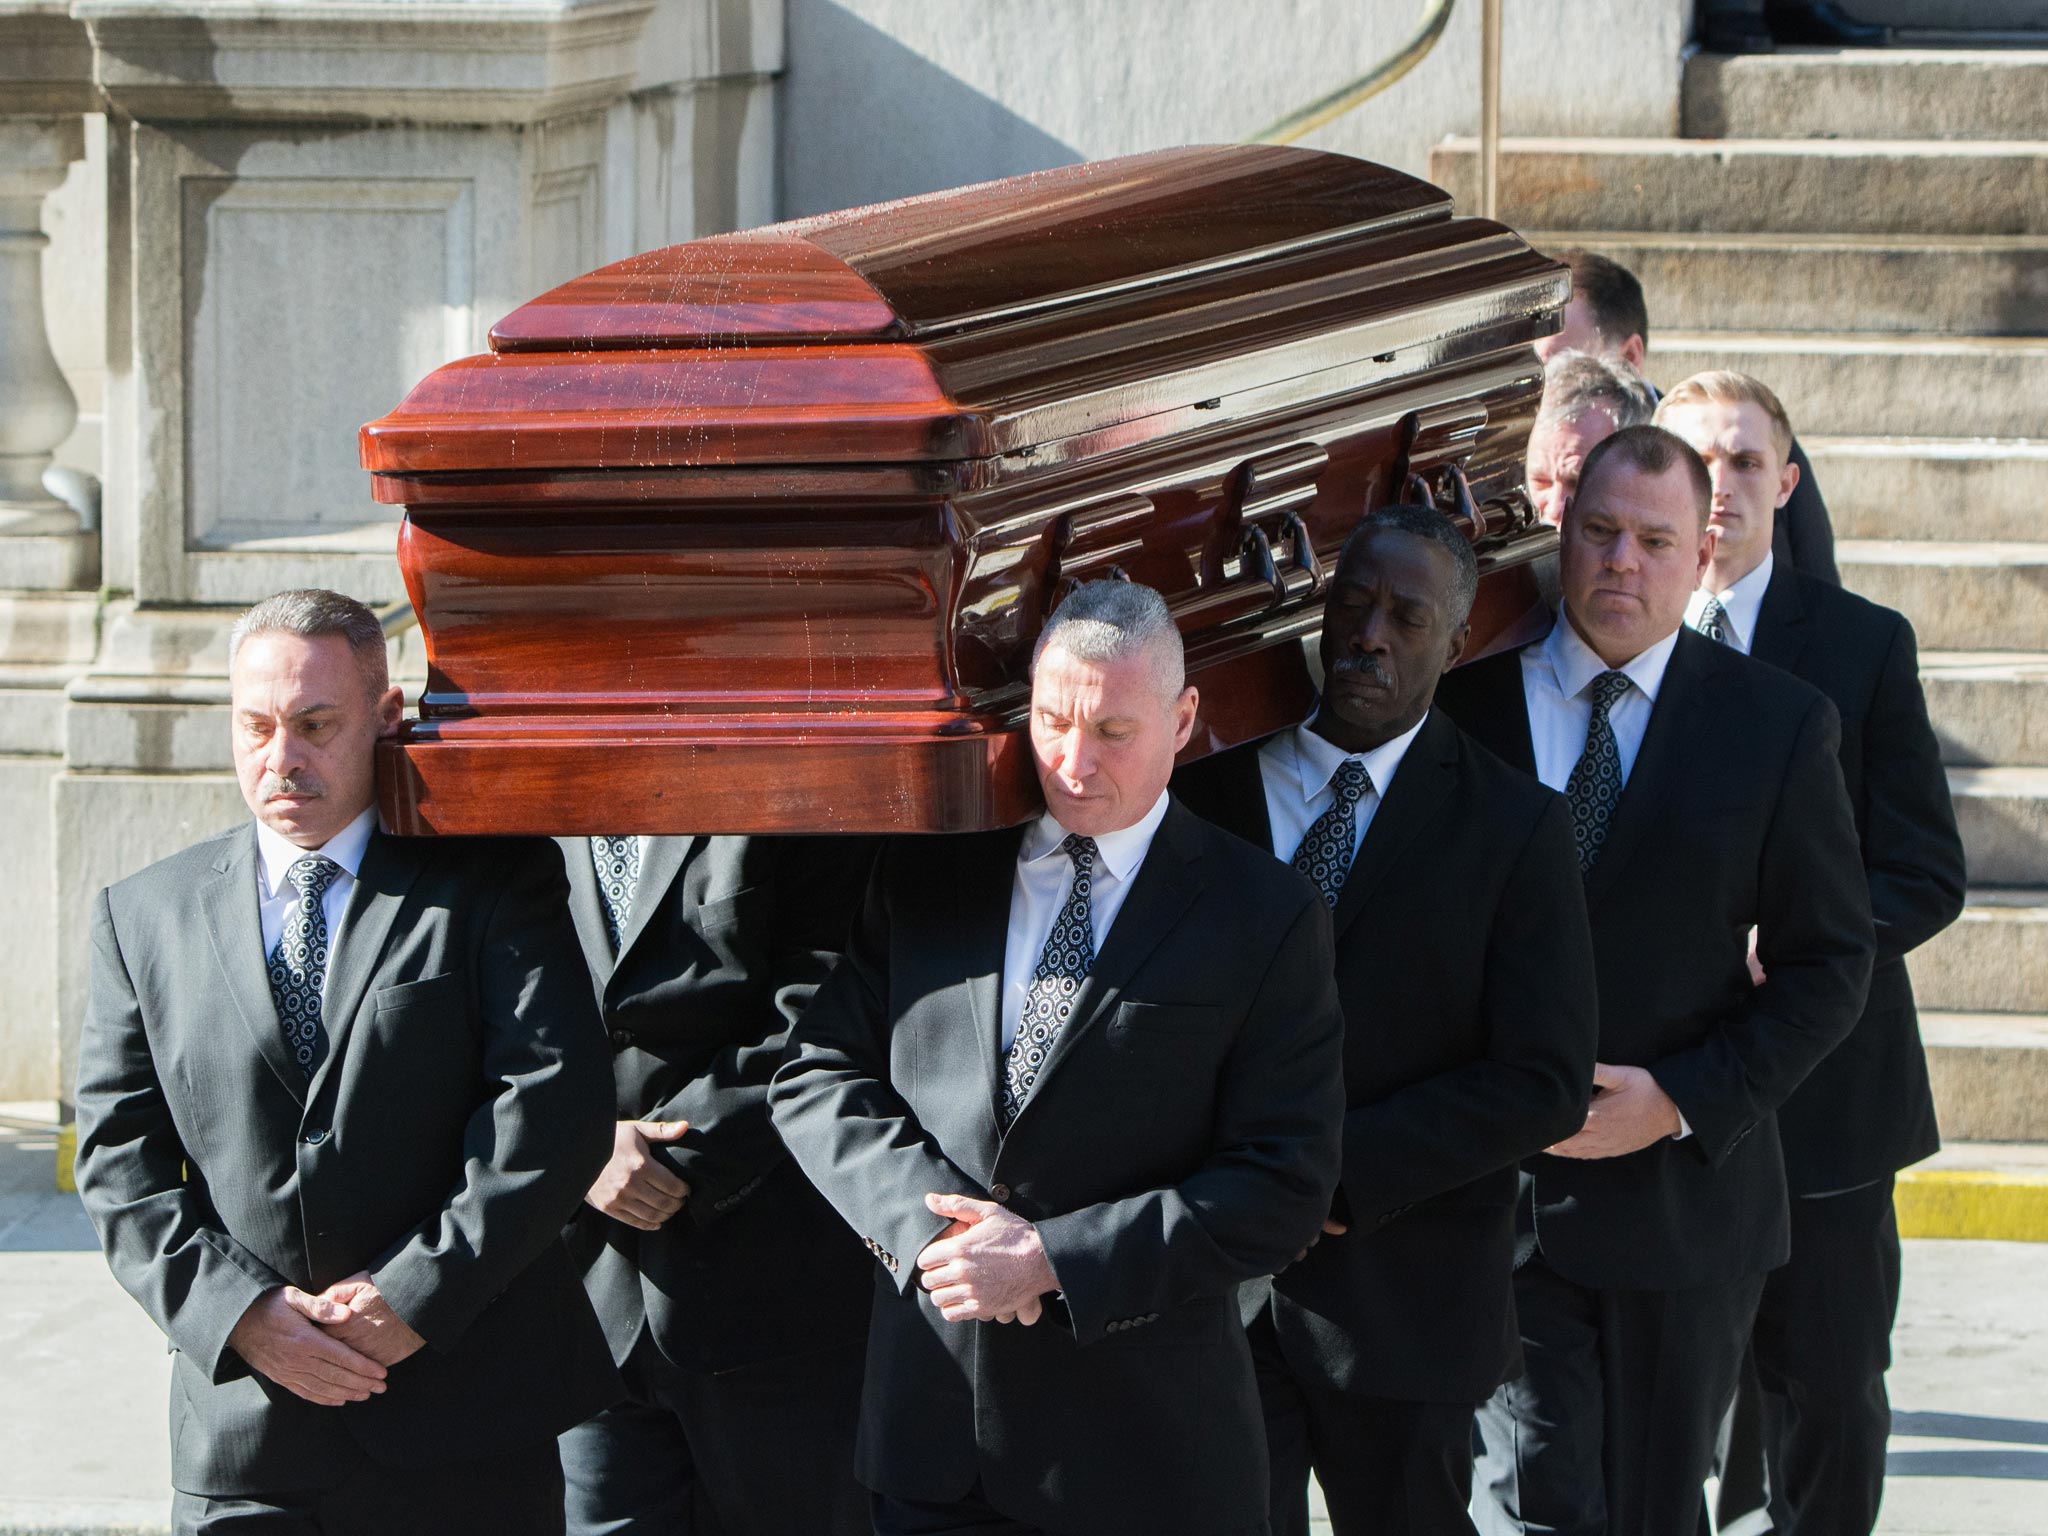 The casket carrying actor Philip Seymour Hoffman leaves the funeral service